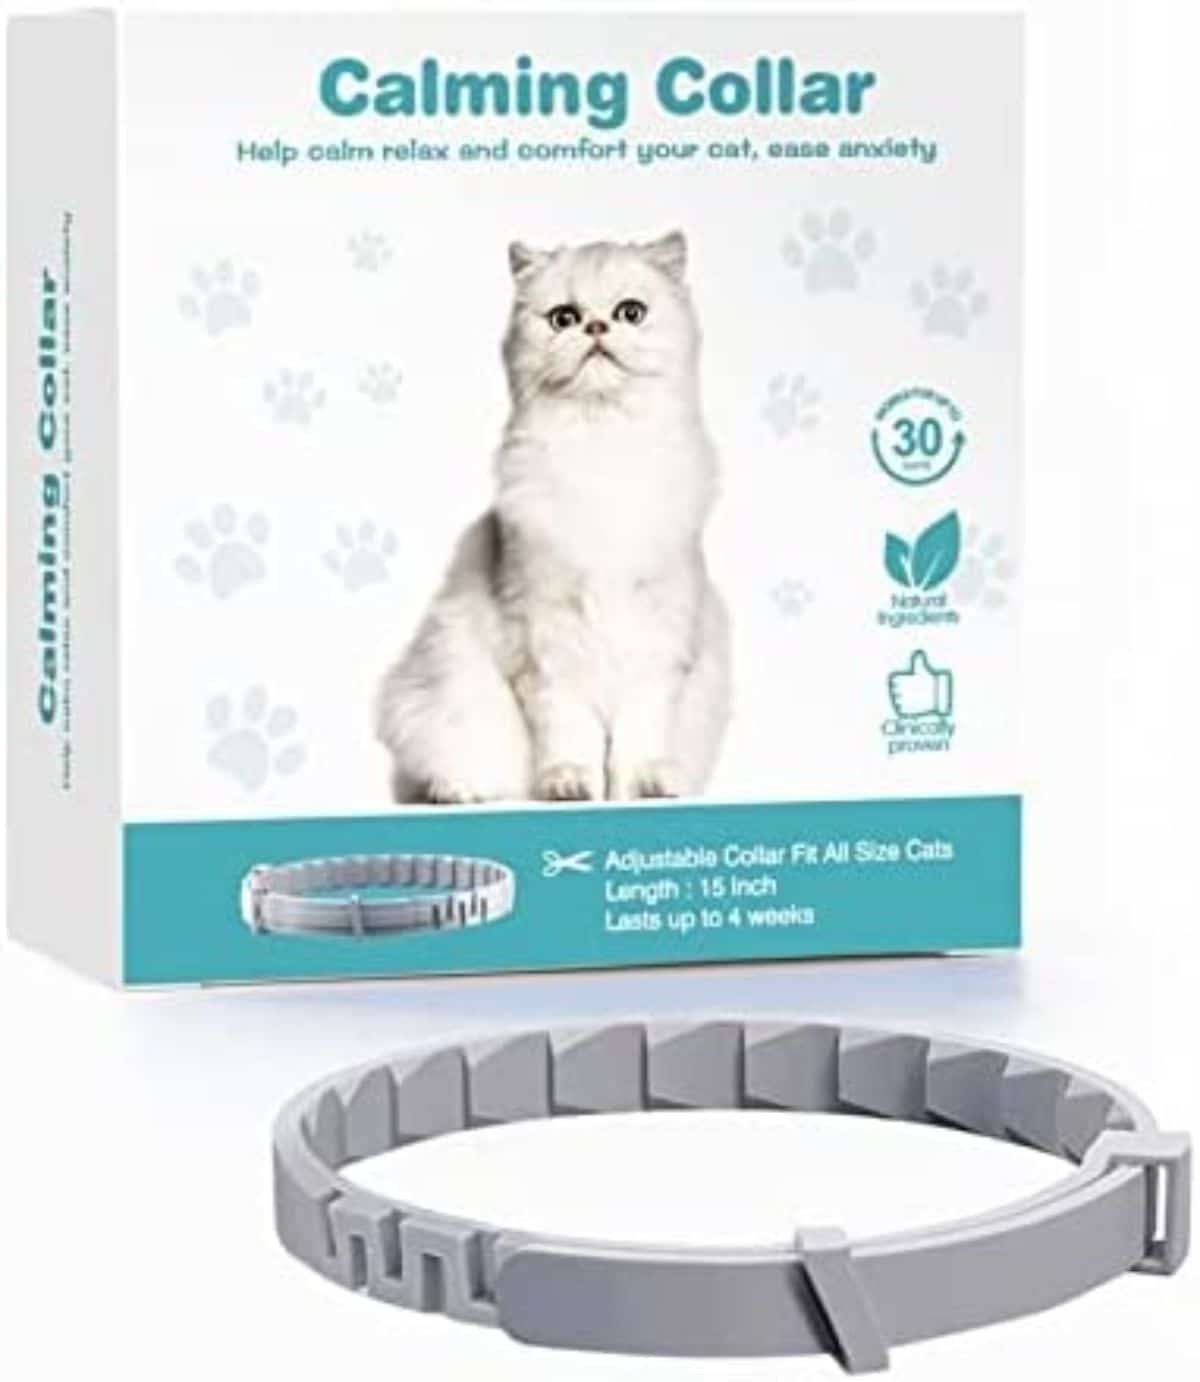 CPFK Calming Collar for Cats and Kittens